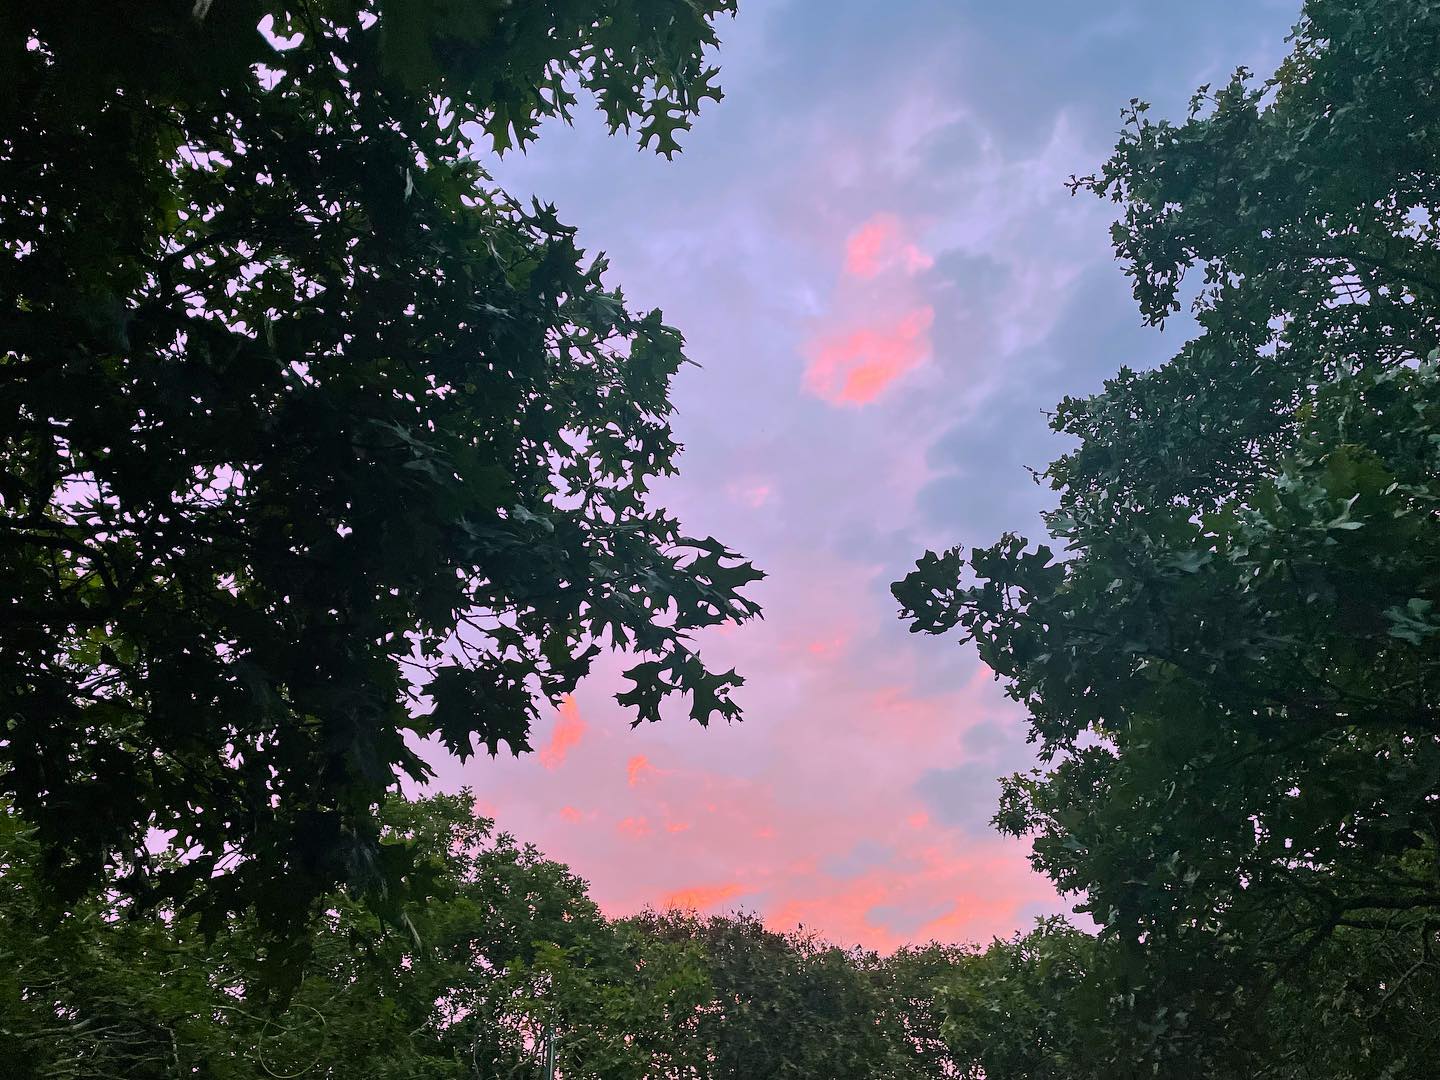 So quiet, so beautiful. Catching the sunrise has its own rewards. Hoping your week is starting on a sweet note. Good morning ☀️!
#greatpondfoundation #grateful #sky #clouds #sunrise #monday #september #pinkclouds #leaves #lookup #outside #marthasvineyard #mv #mvy #edgartown #goodmorning #goodvibes #quiet #light #morning #morningmotivation #morninglight #pinksky